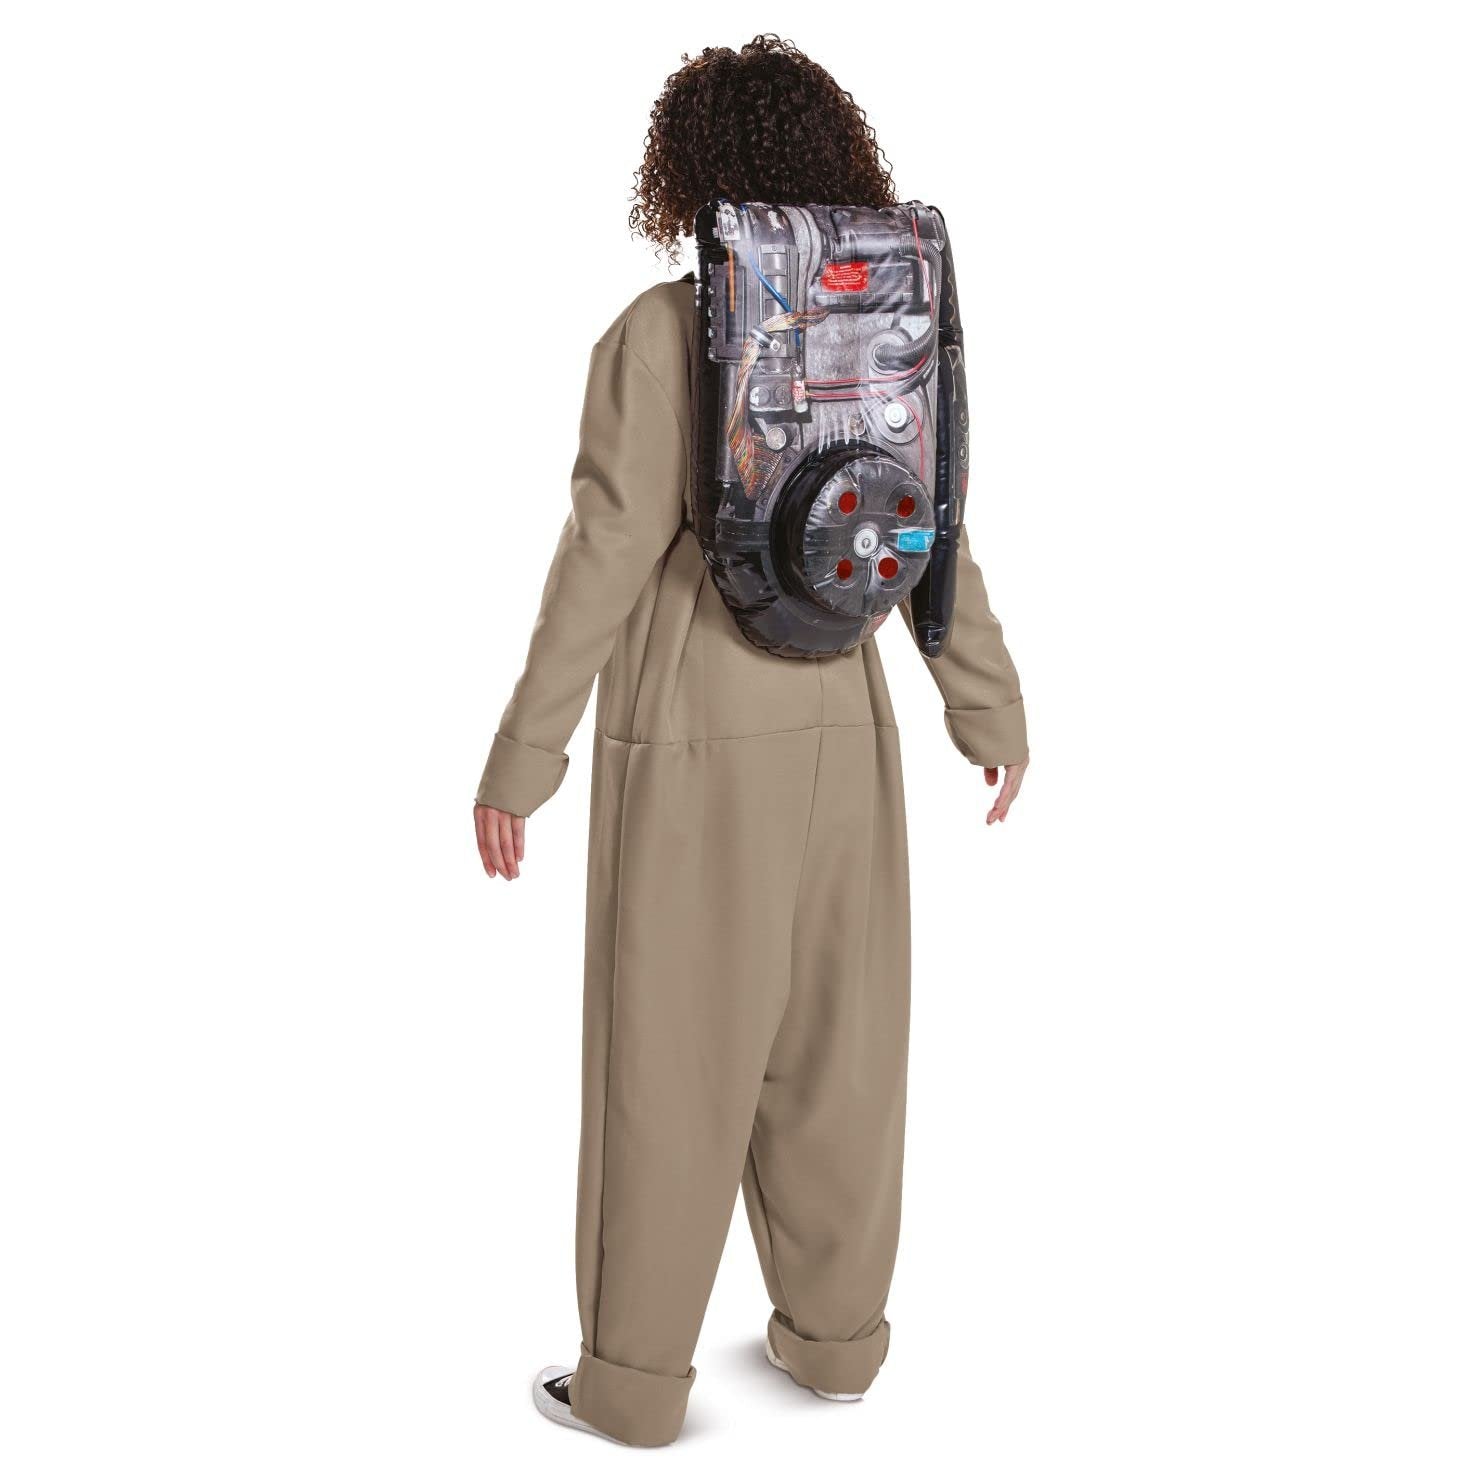 Disguise Adults, Official Ghostbusters Afterlife Movie Costume Jumpsuit with Inflatable Proton Pack, Multicolored, Medium (38-40)